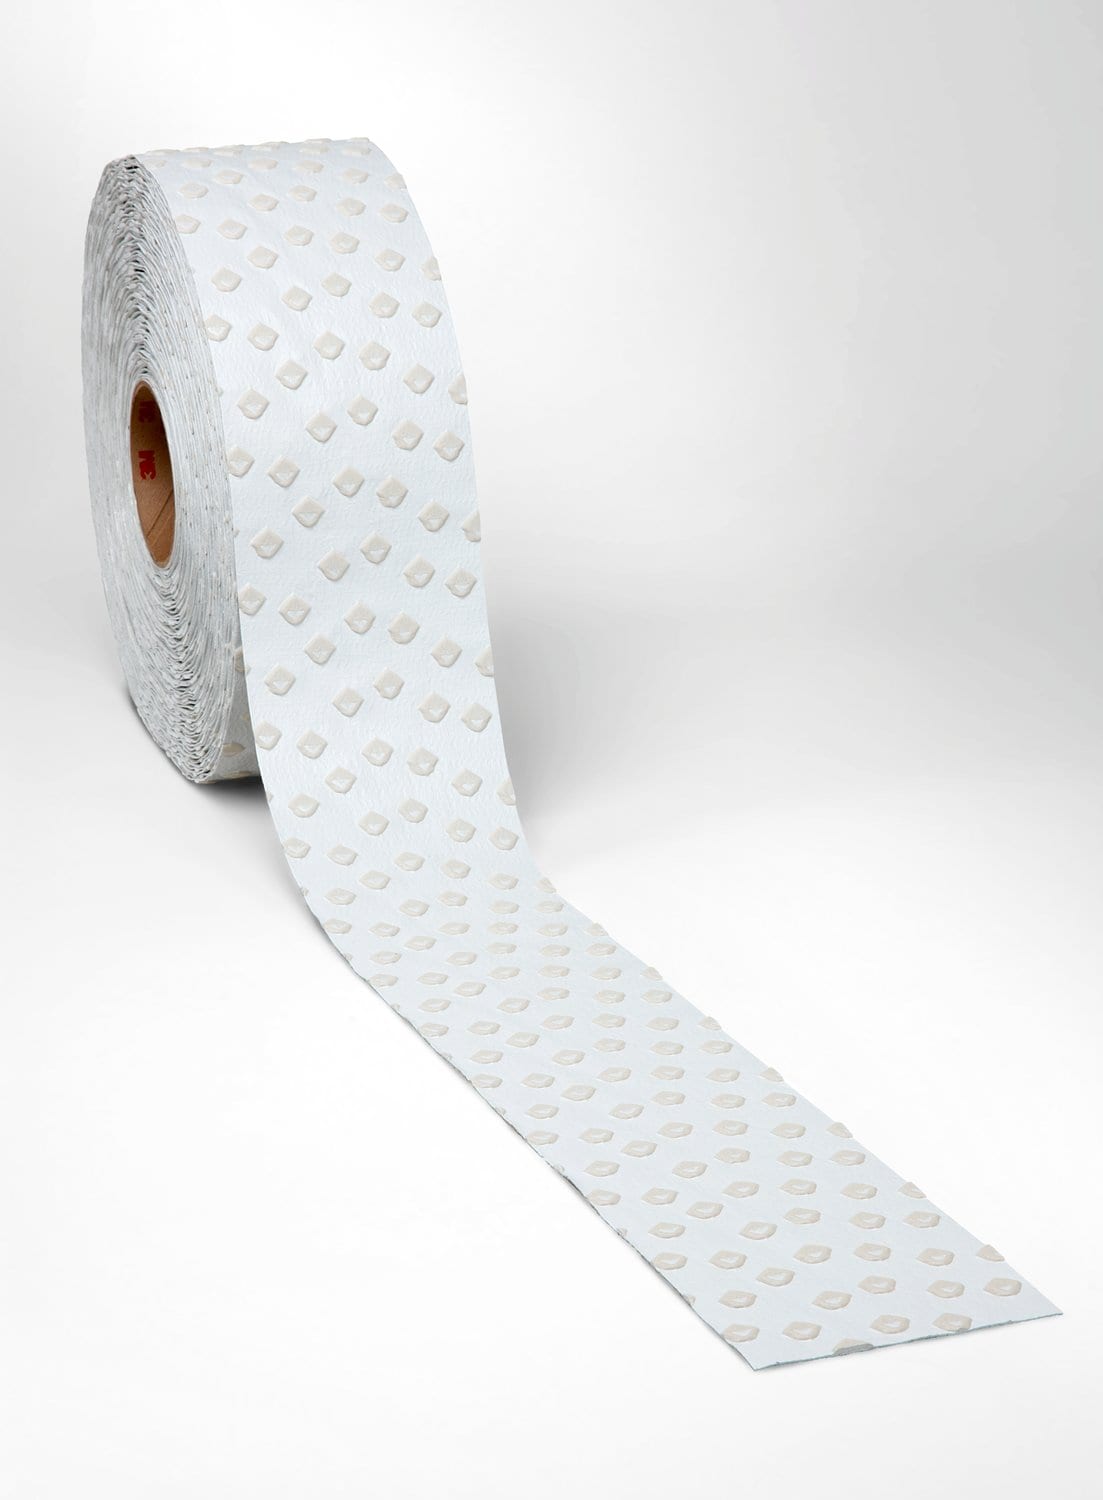 7100010738 - 3M Stamark Removable Pavement Marking Tape L710, White, Linered,
Configurable Roll